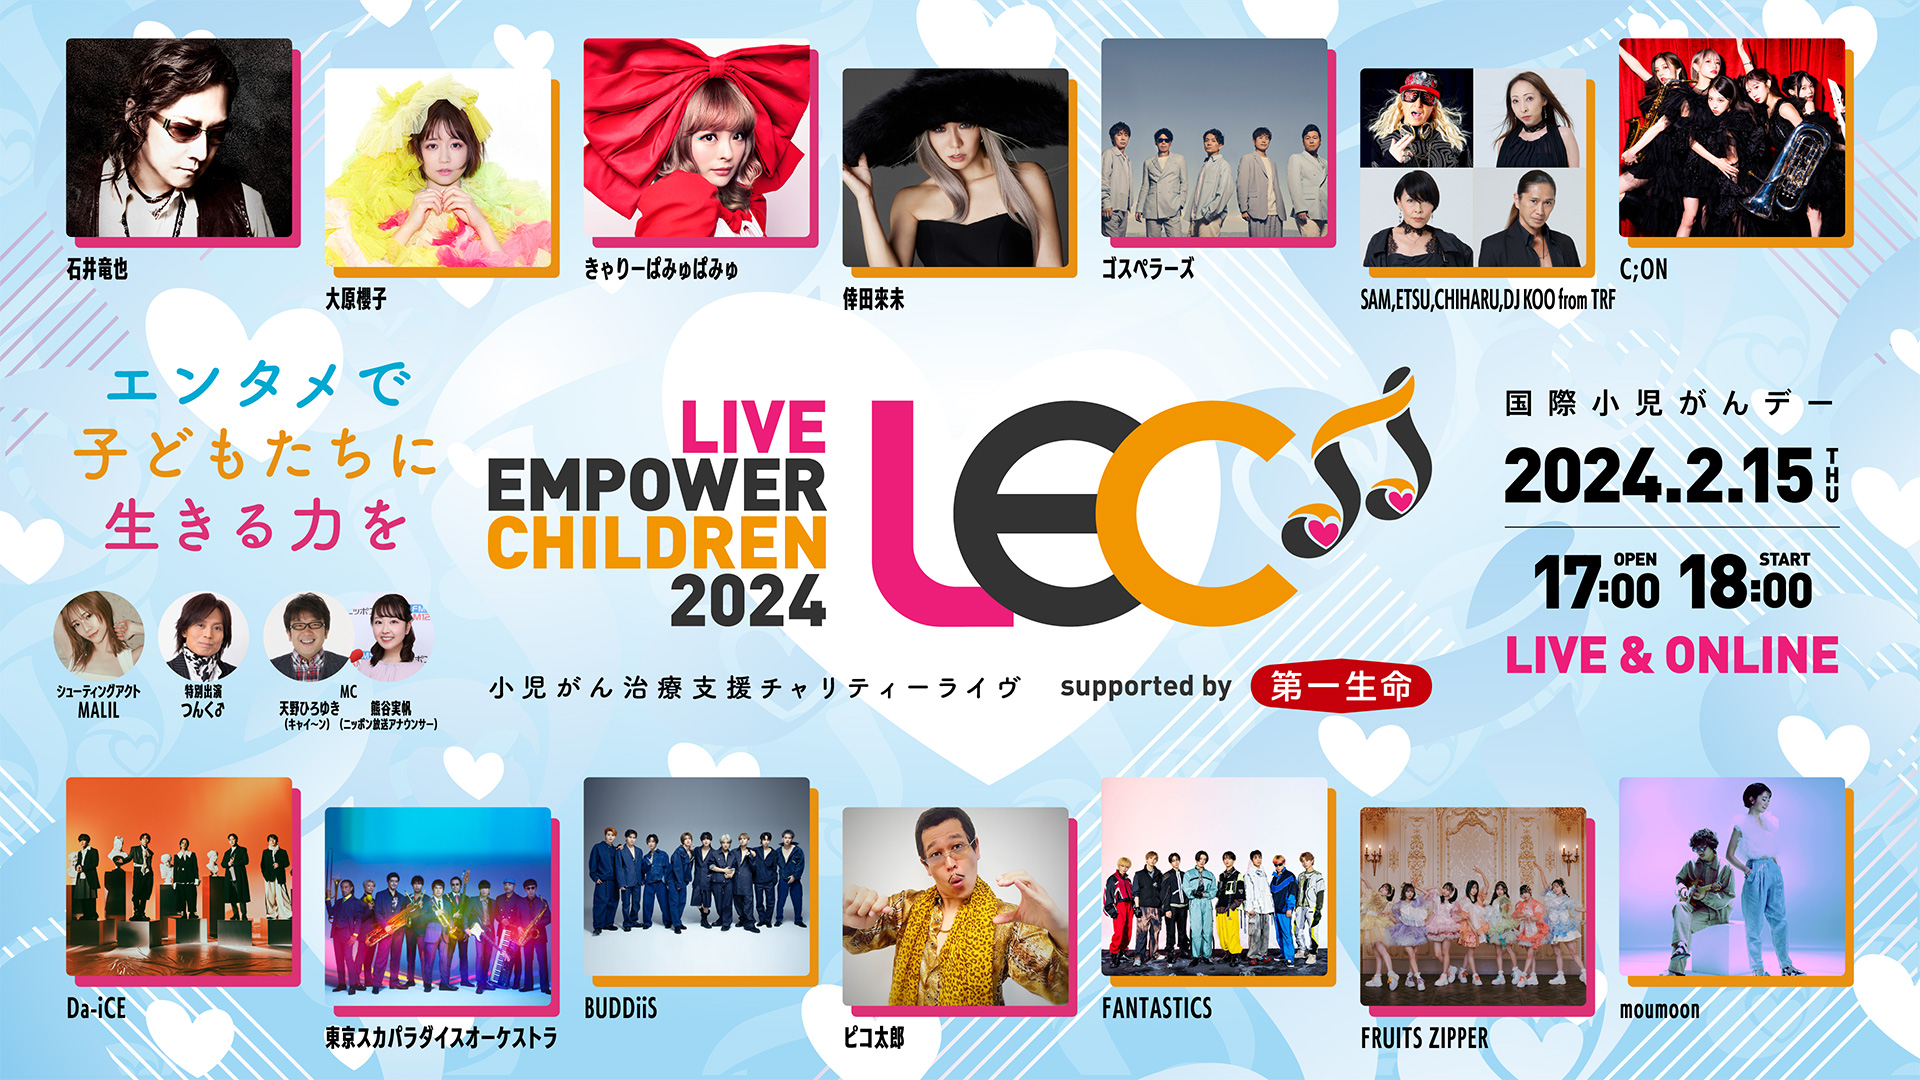 LIVE EMPOWER CHILDREN 2024 supported by 第一生命保険